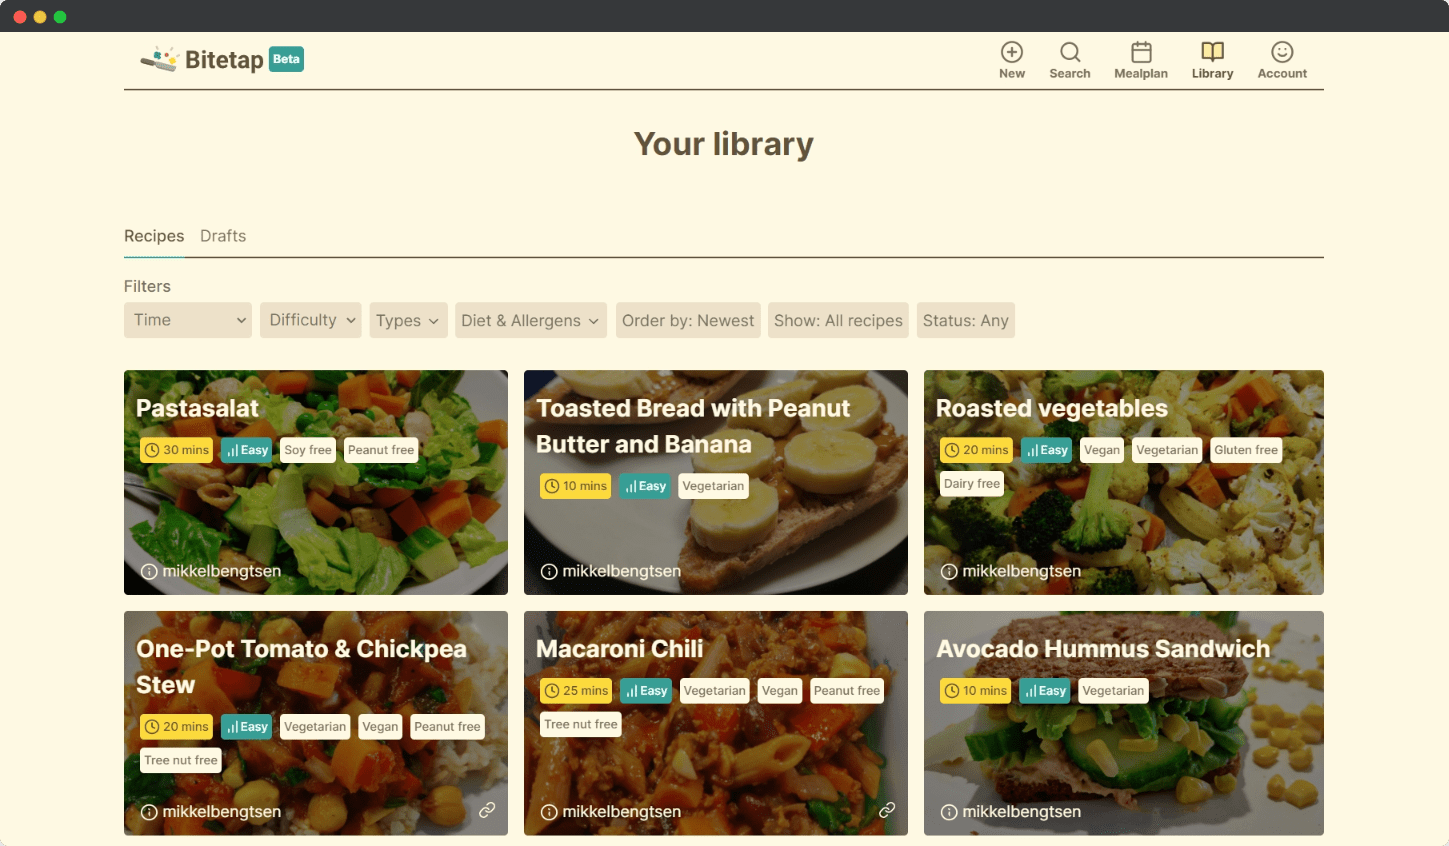 In app image of a user's library